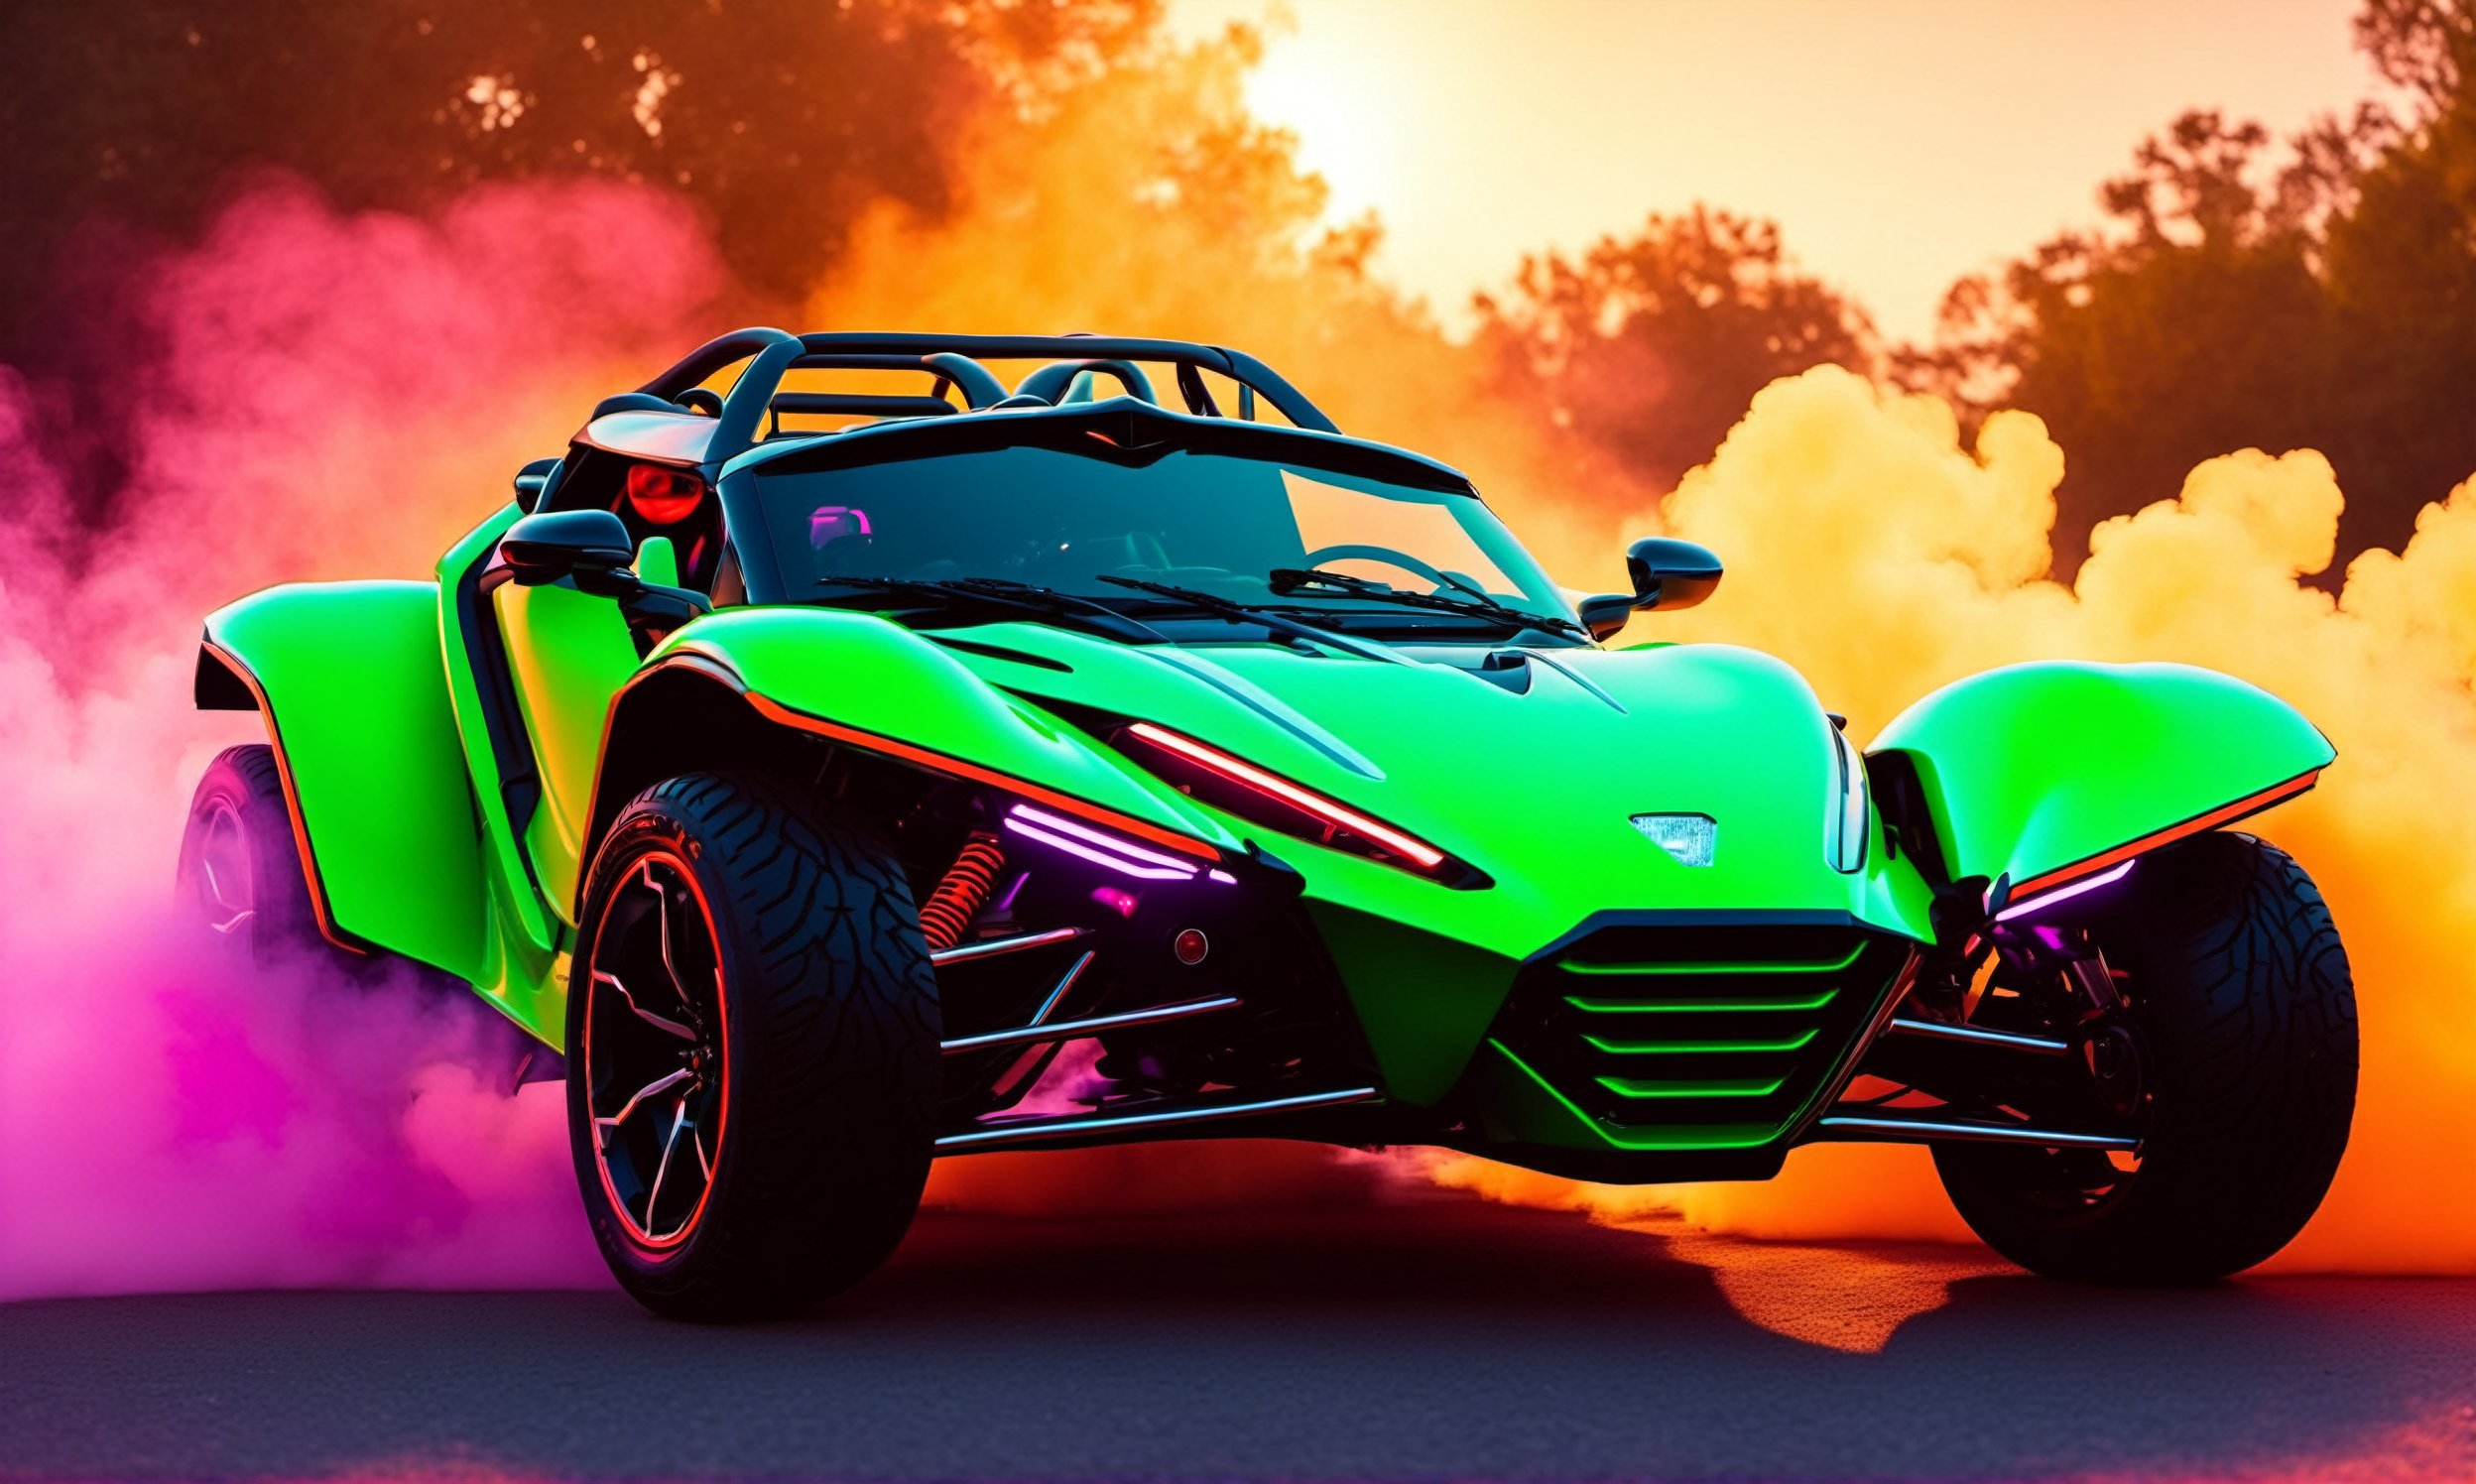 front  view, ultra relistic,  of a green ariel nomad  with headlights on, a light bar on the roof shining bright beams of white light ,  background of colorful smoke , ✏️🎨, 8k stunning artwork, vapor wave, neon smoke, hyper colorful, stunning art style, car with holographic paint, amazing wallpaper, futuristic art style, 8 k highly detailed ❤🔥 🔥 💀 🤖 🚀4k phone wallpaper, inspired by Mike Winkelmann, ,H effect